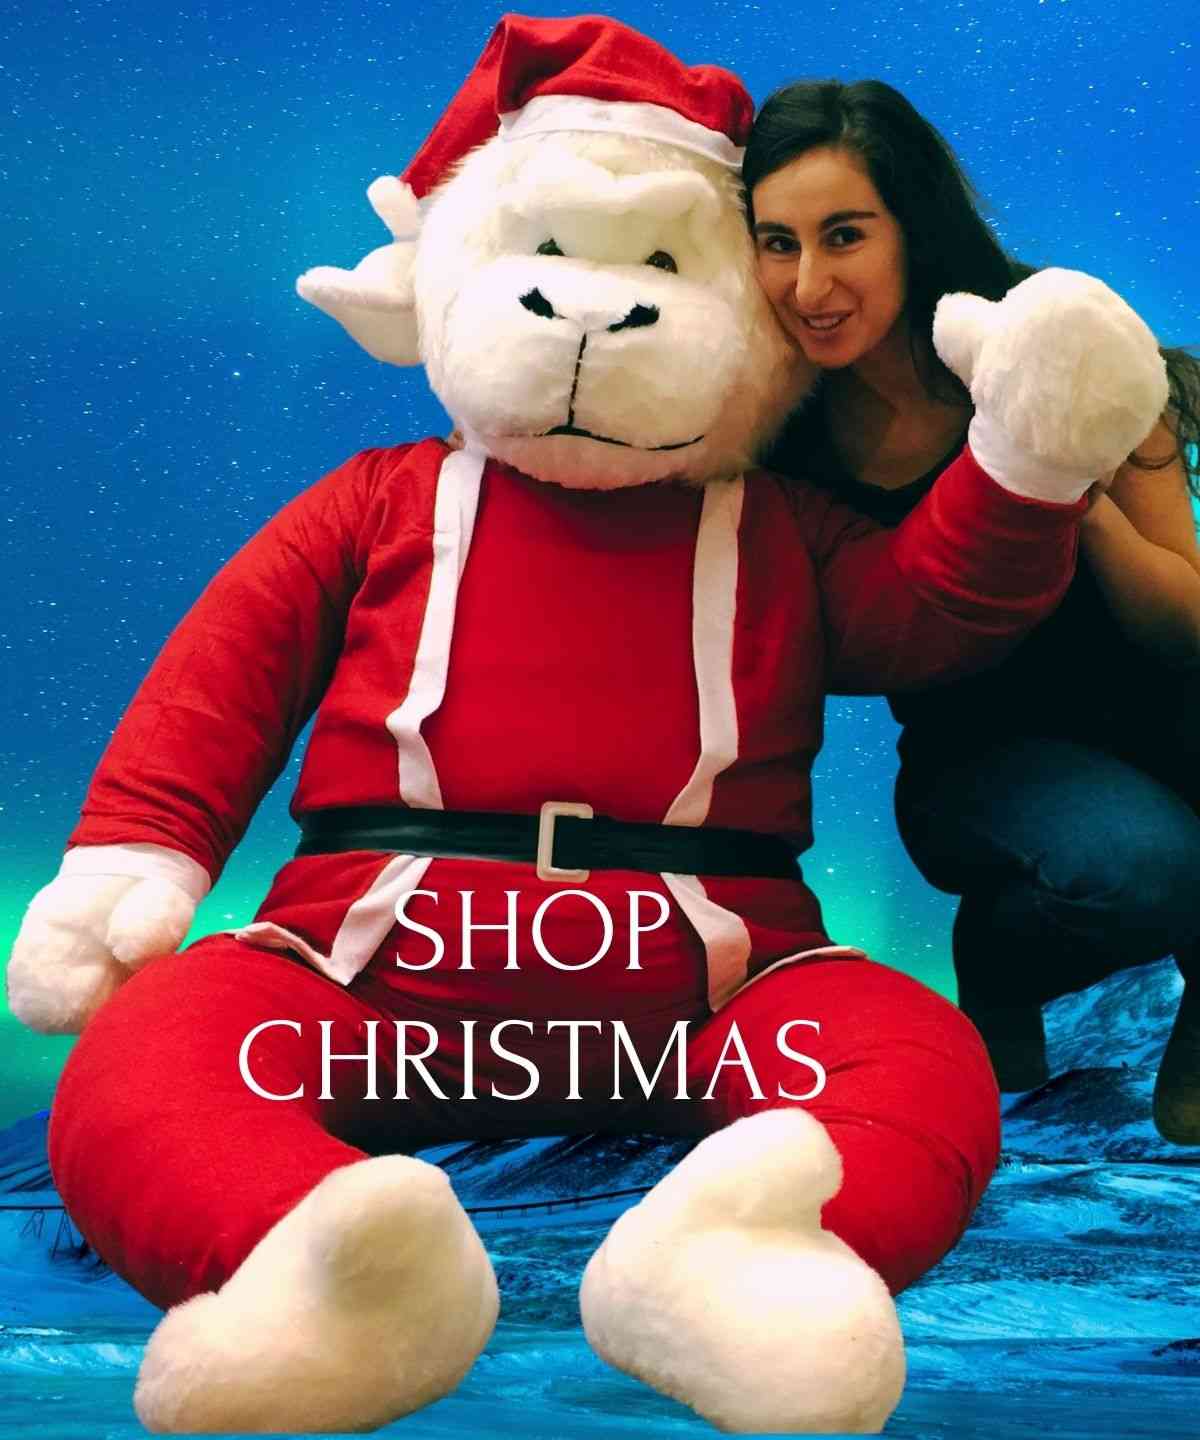 Shop for Christmas theme giant stuffed animals at the Big Plush Store where huge stuffed animals are manufactured in the USA